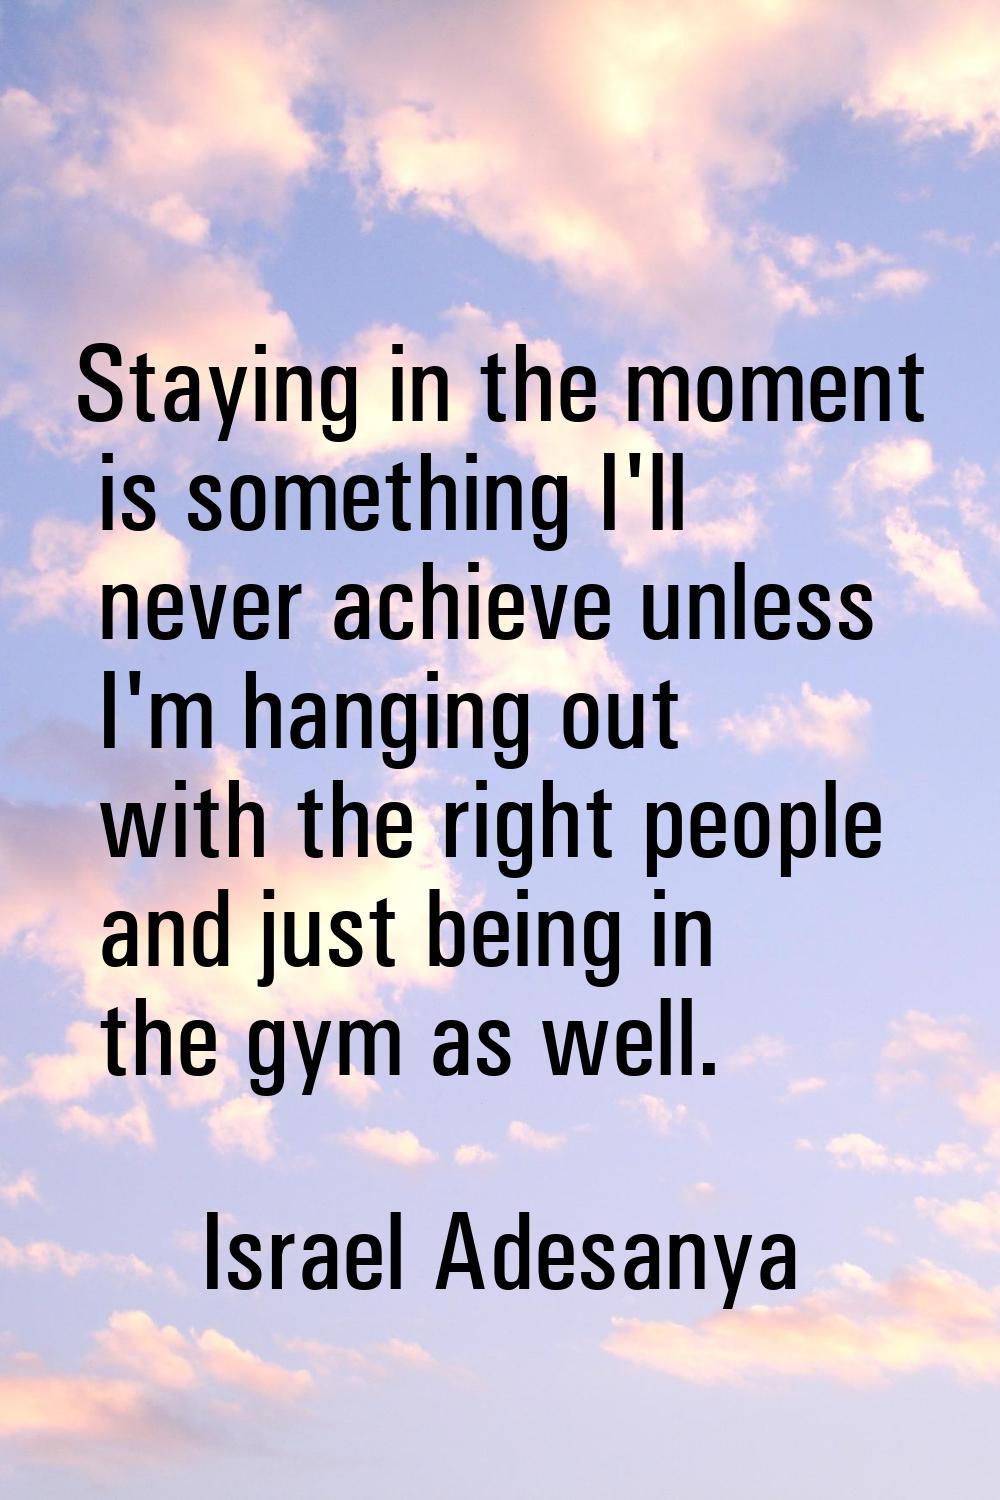 Staying in the moment is something I'll never achieve unless I'm hanging out with the right people 